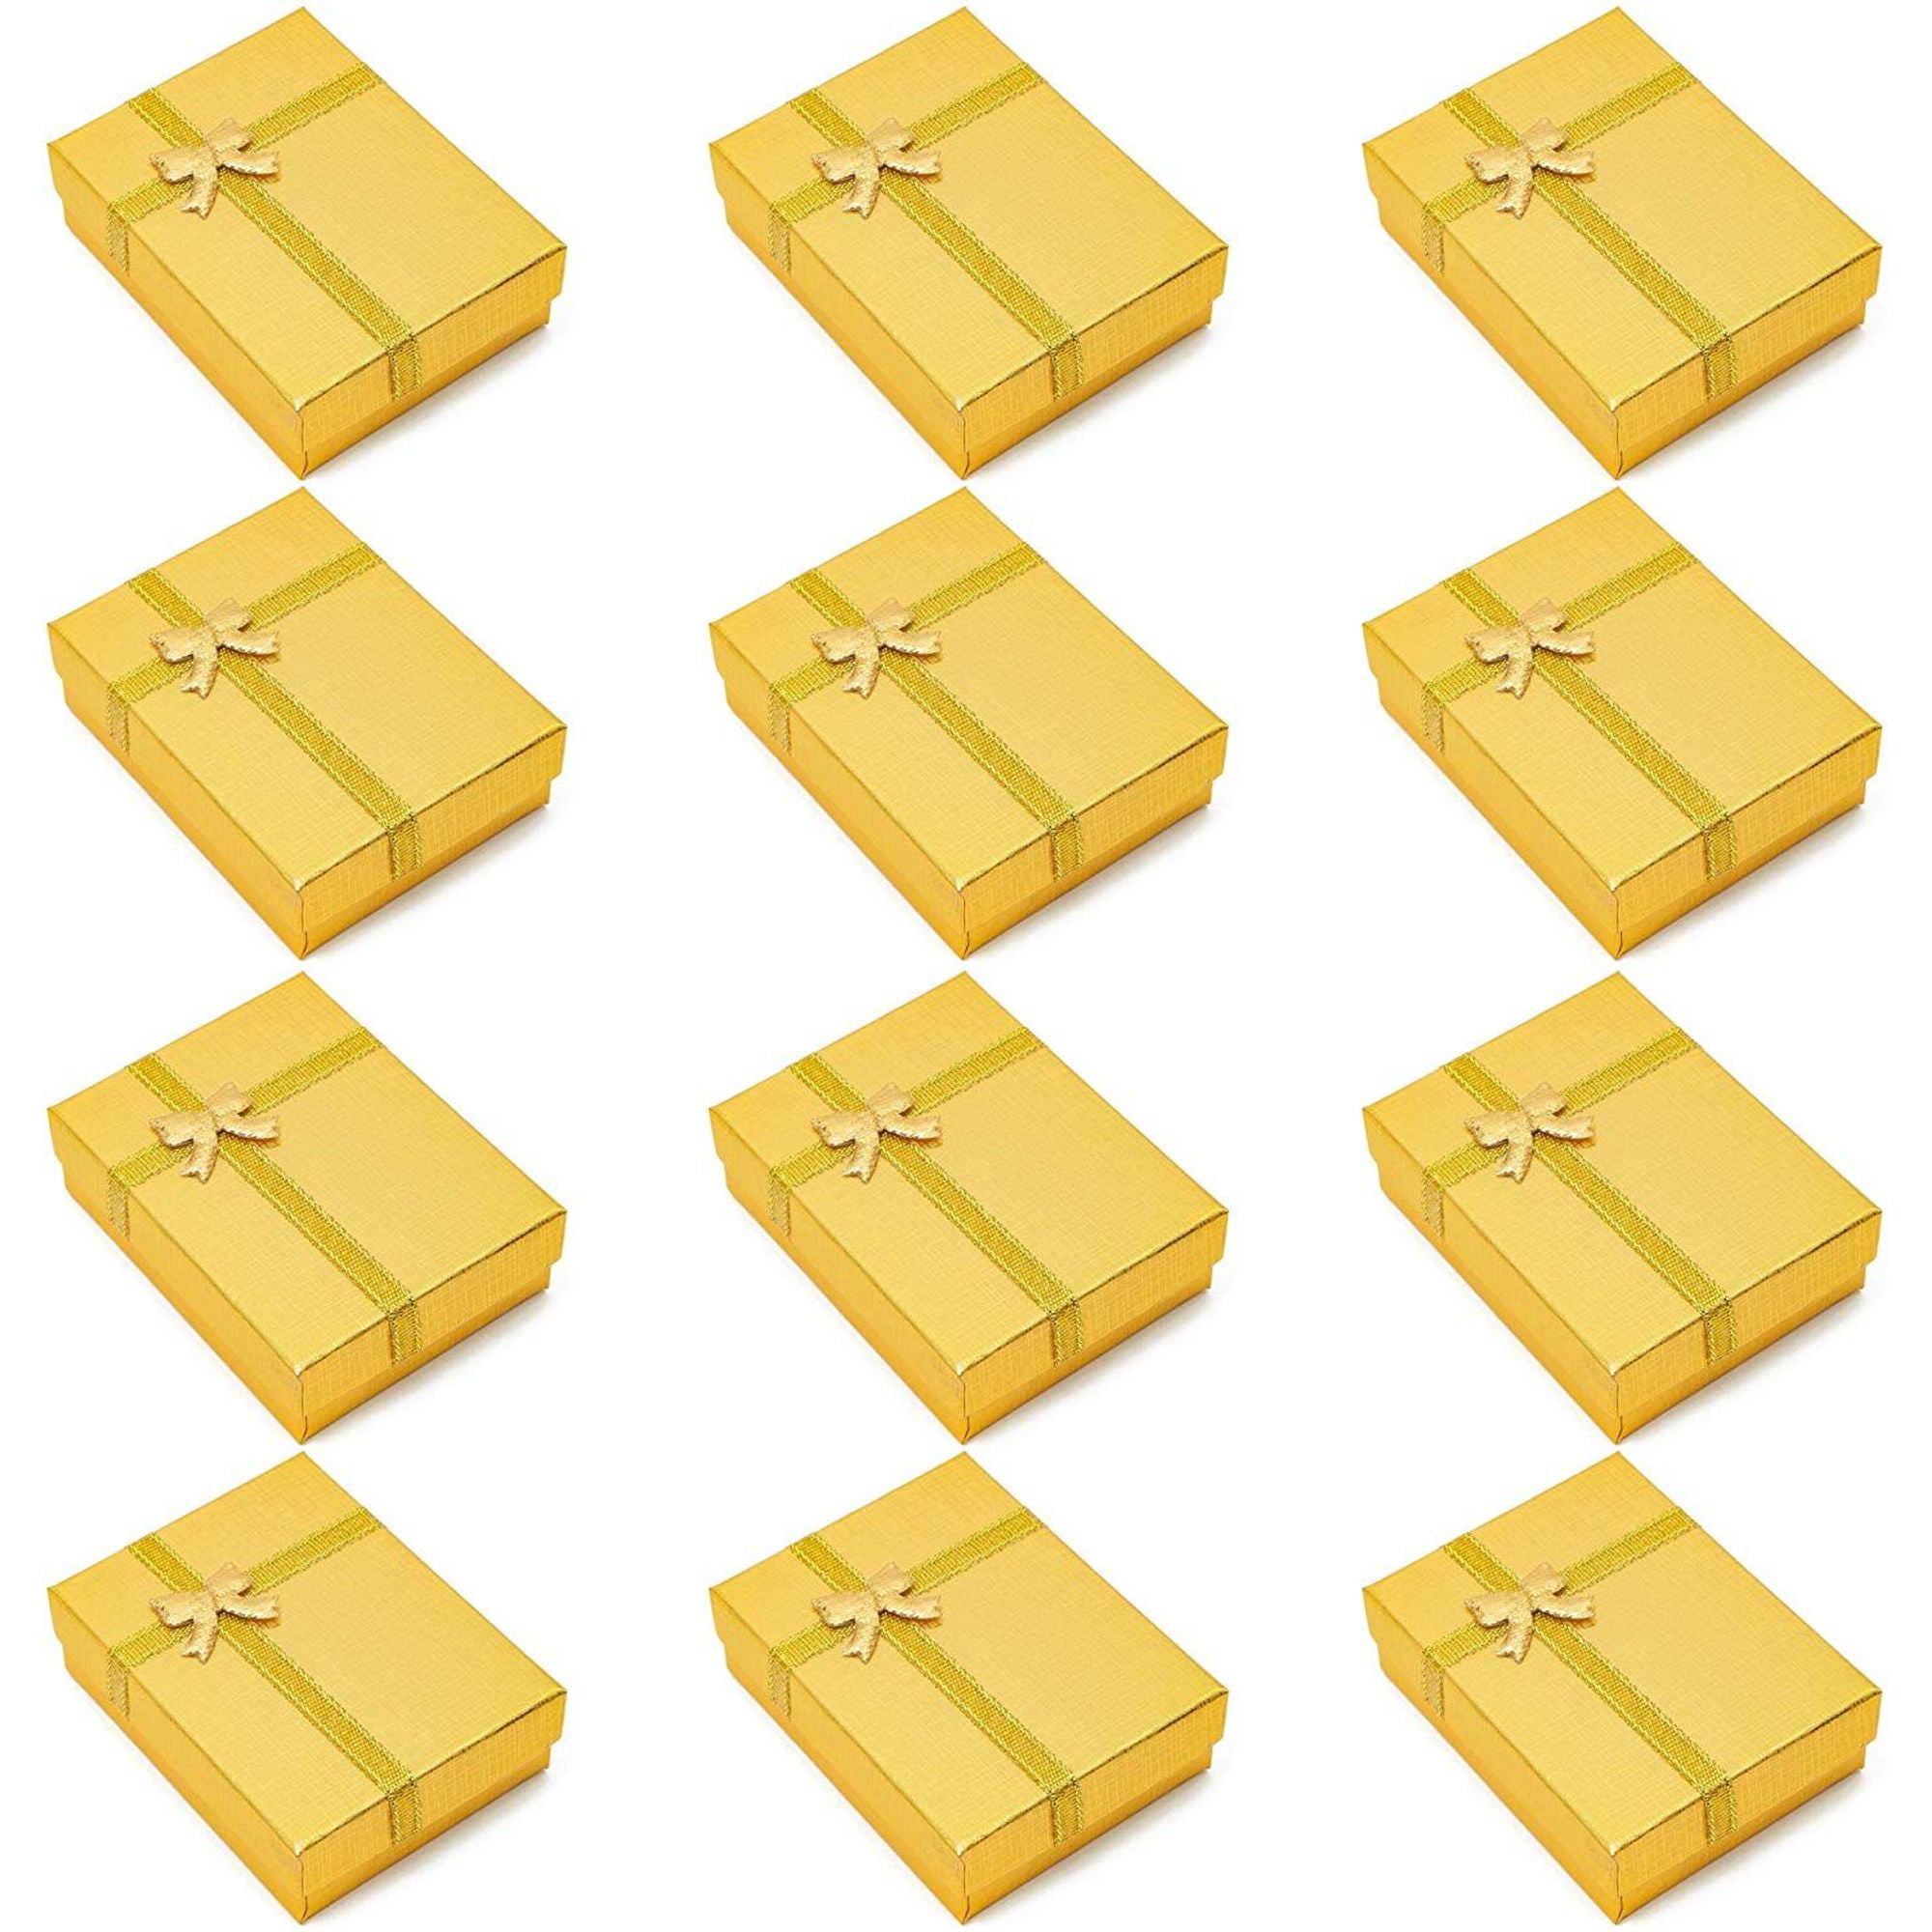 12x Paper Gift Box For Ring Earring Necklace Jewelry Storage Case with Bow-knot